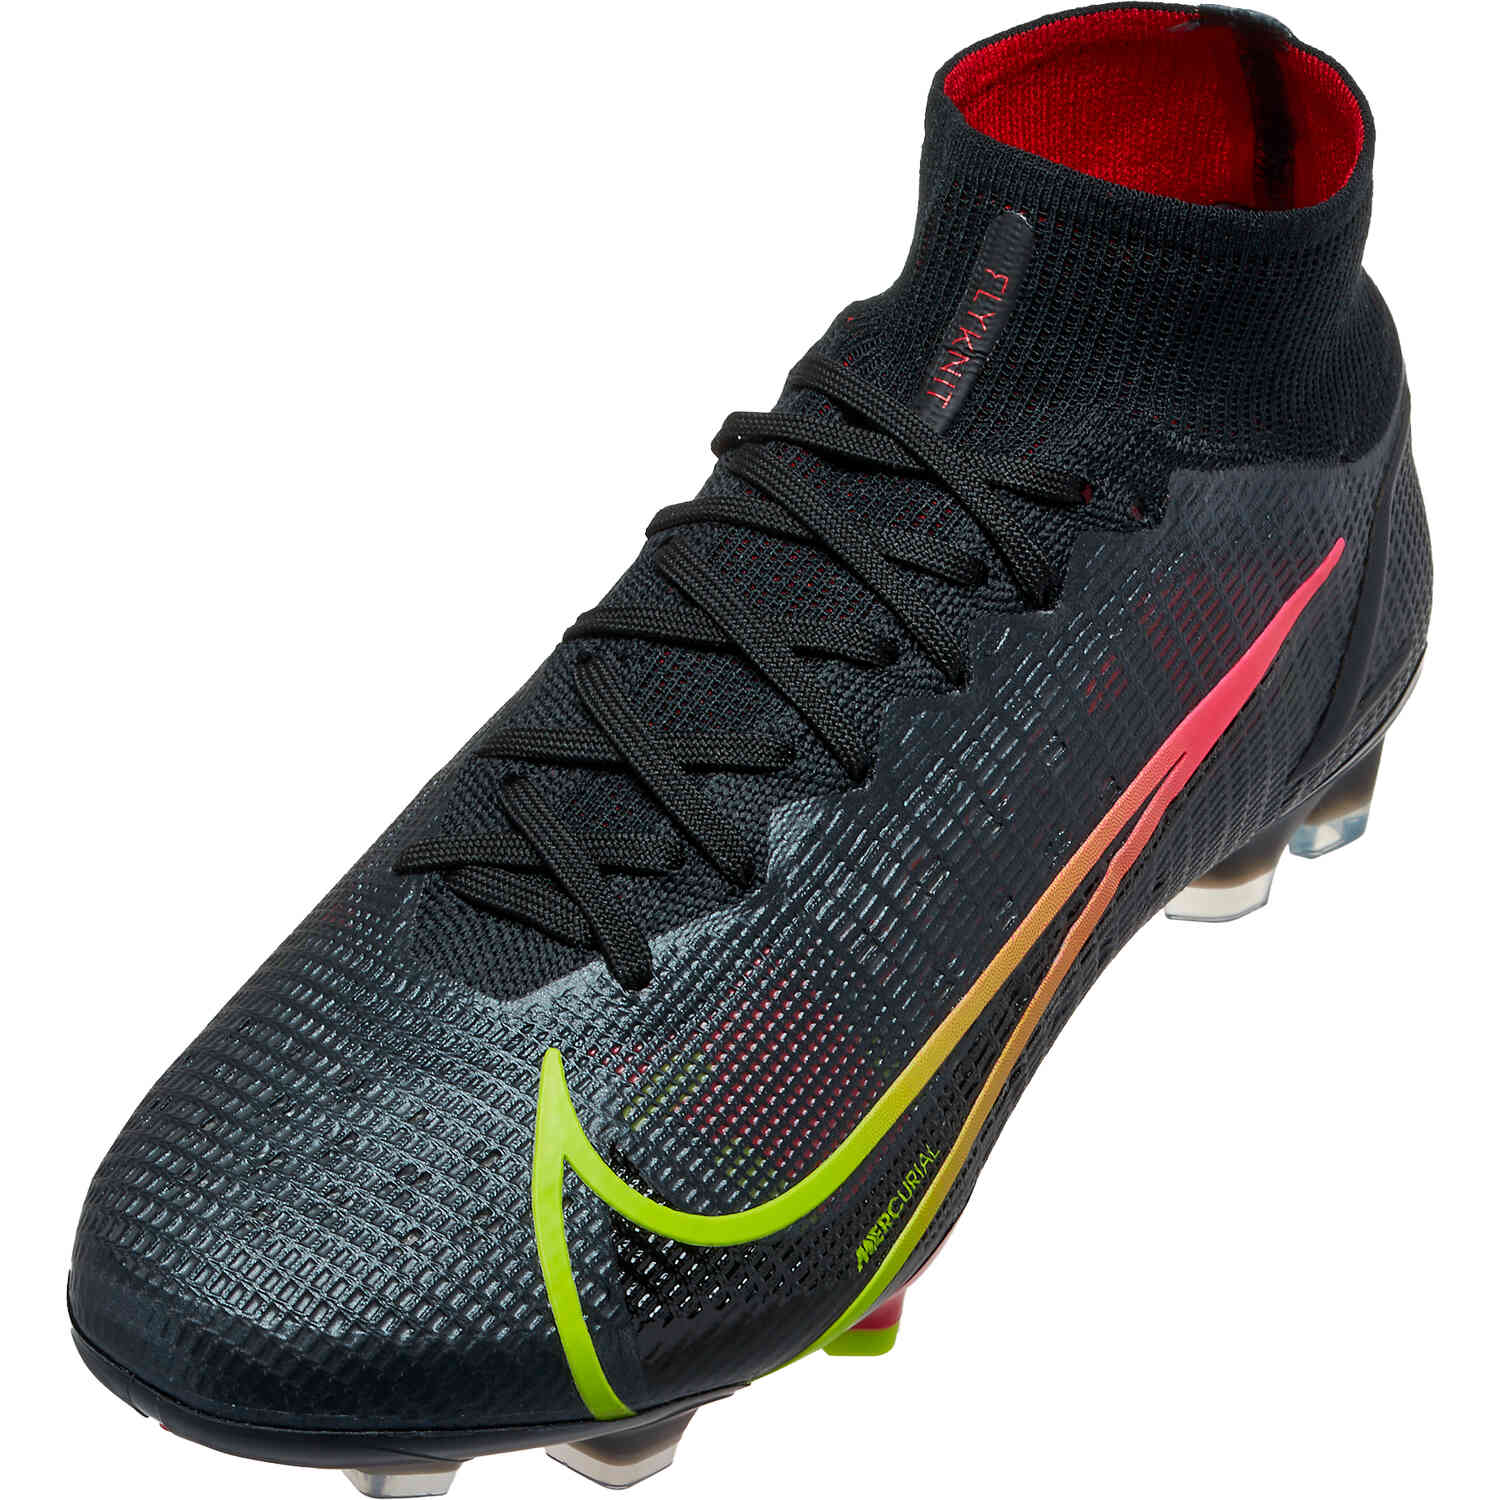 Nike Mercurial Superfly Soccer Cleats